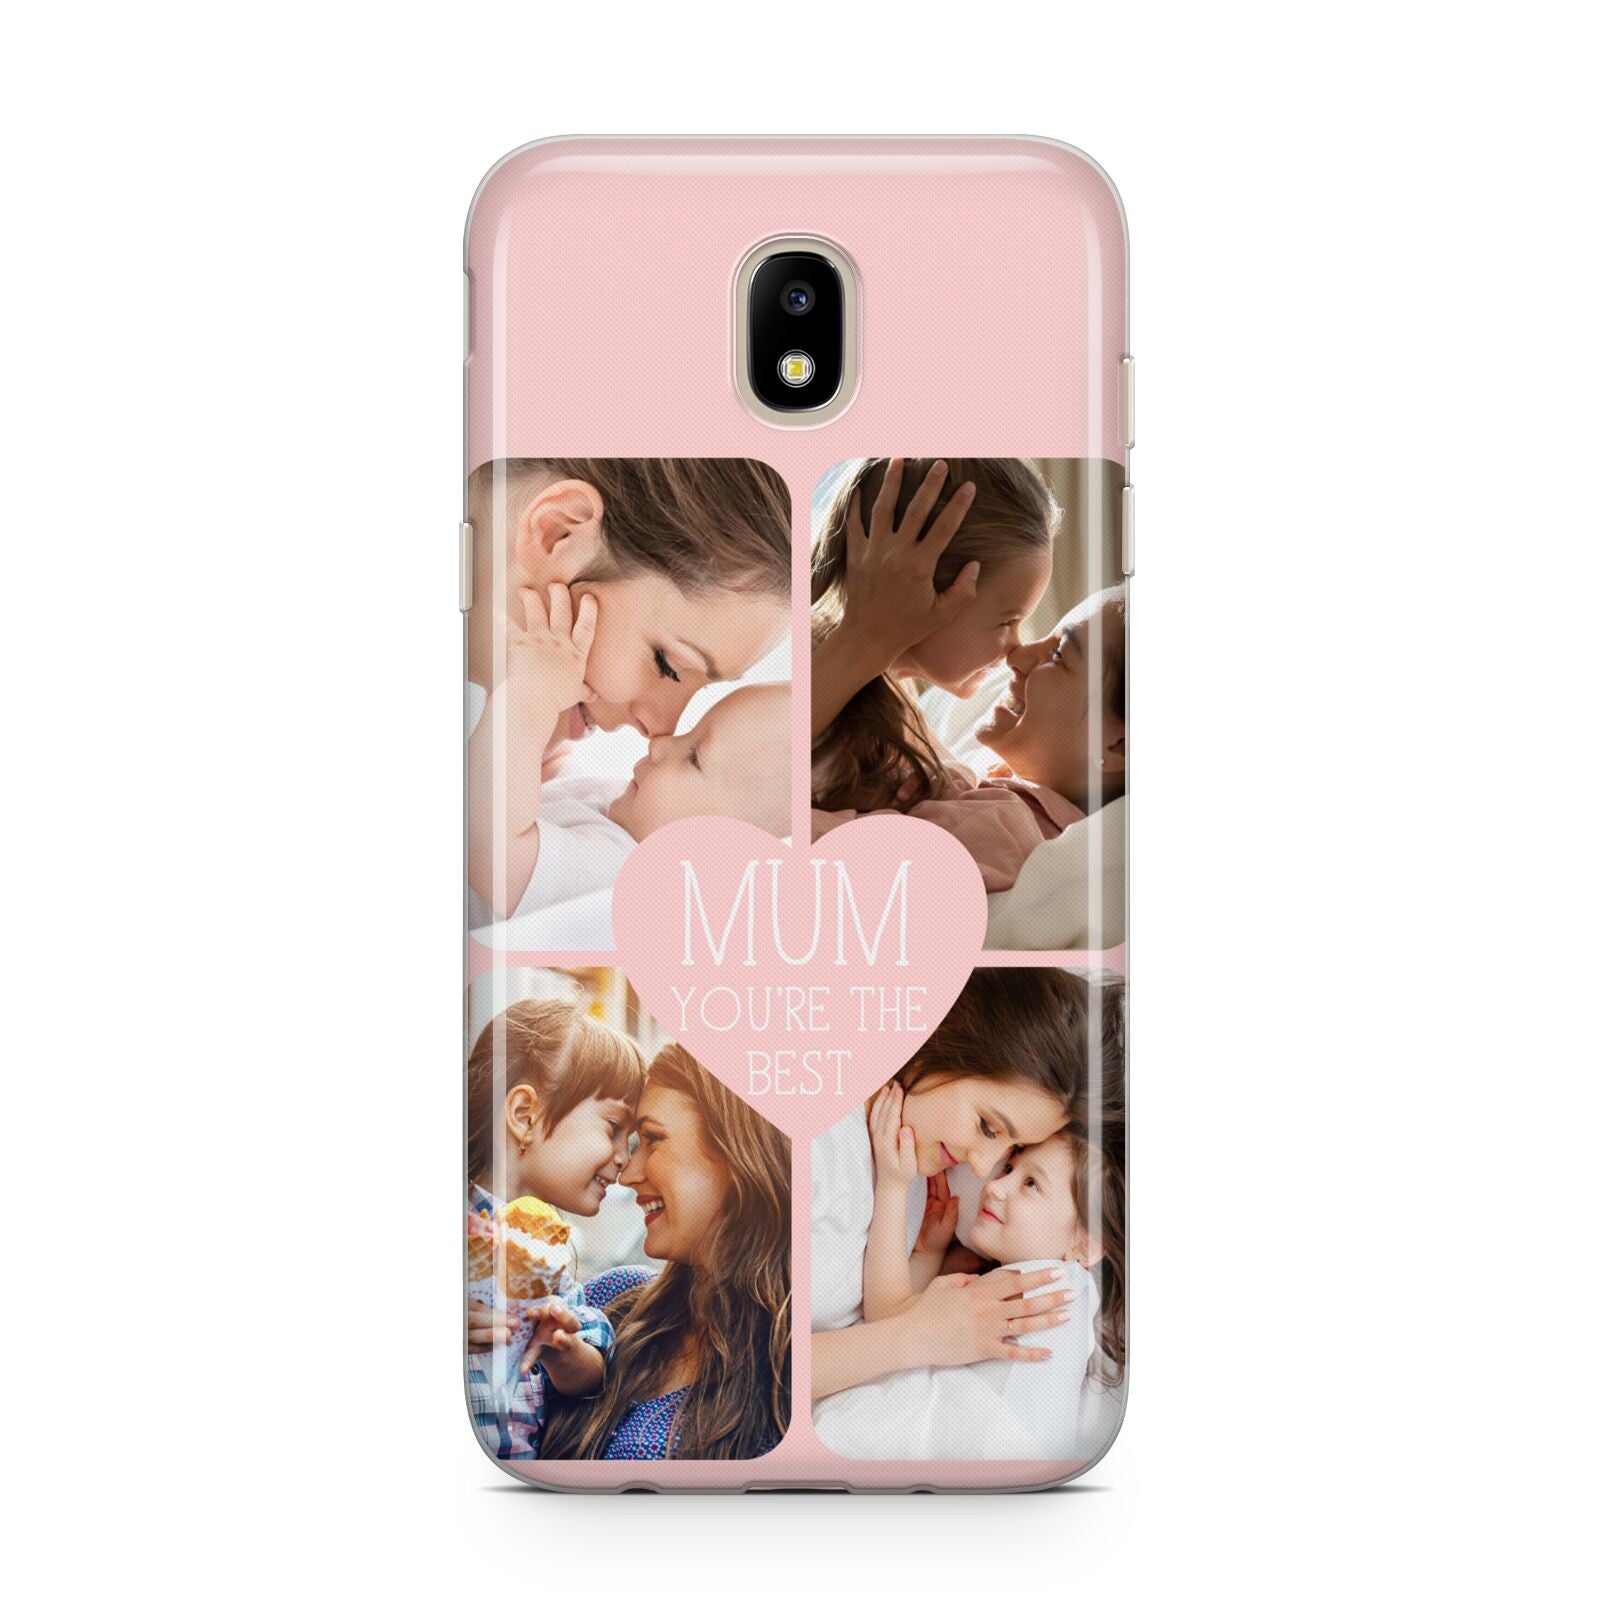 Mothers Day Four Photo Upload Samsung J5 2017 Case